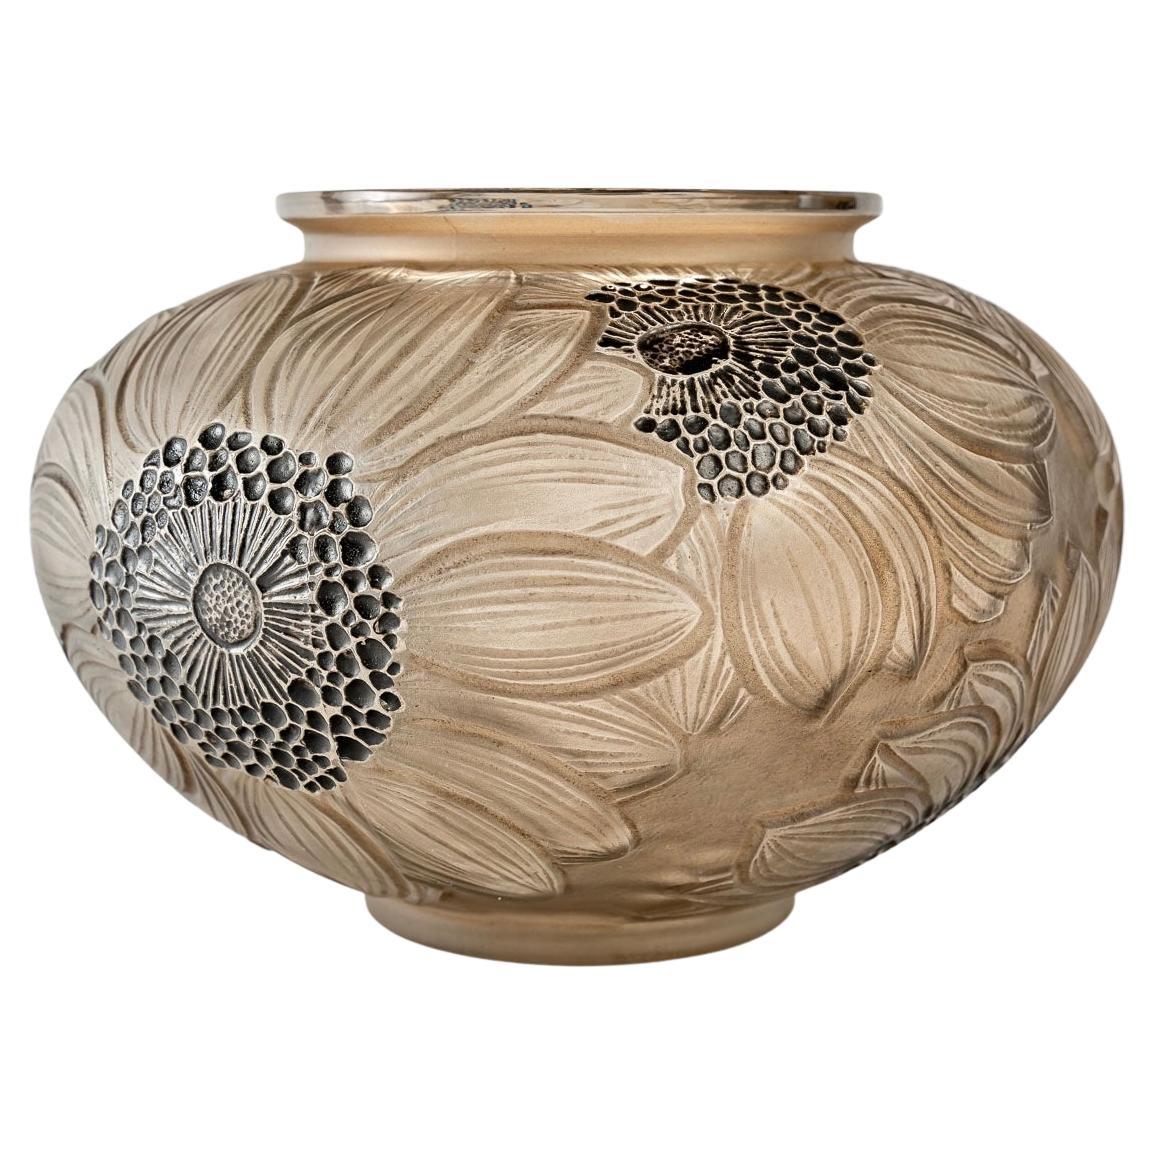 1923 René Lalique Vase Dahlias Frosted Glass with Sepia Patina and Black Enamel